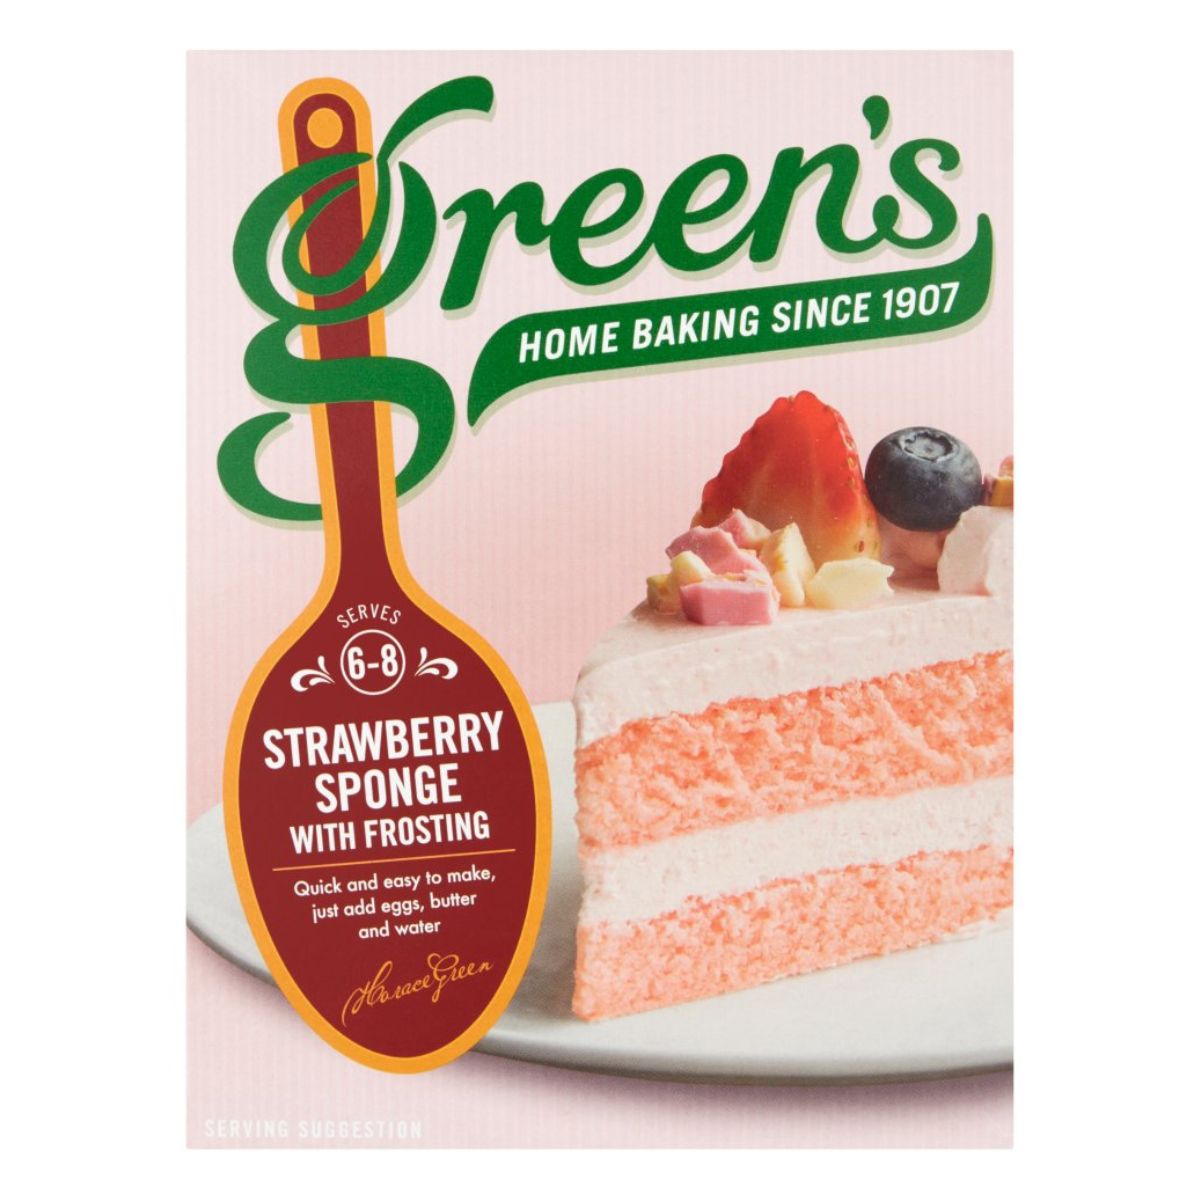 Box of Greens - Strawberry Sponge with Frosting - 381g mix, highlighting quick and easy baking process.